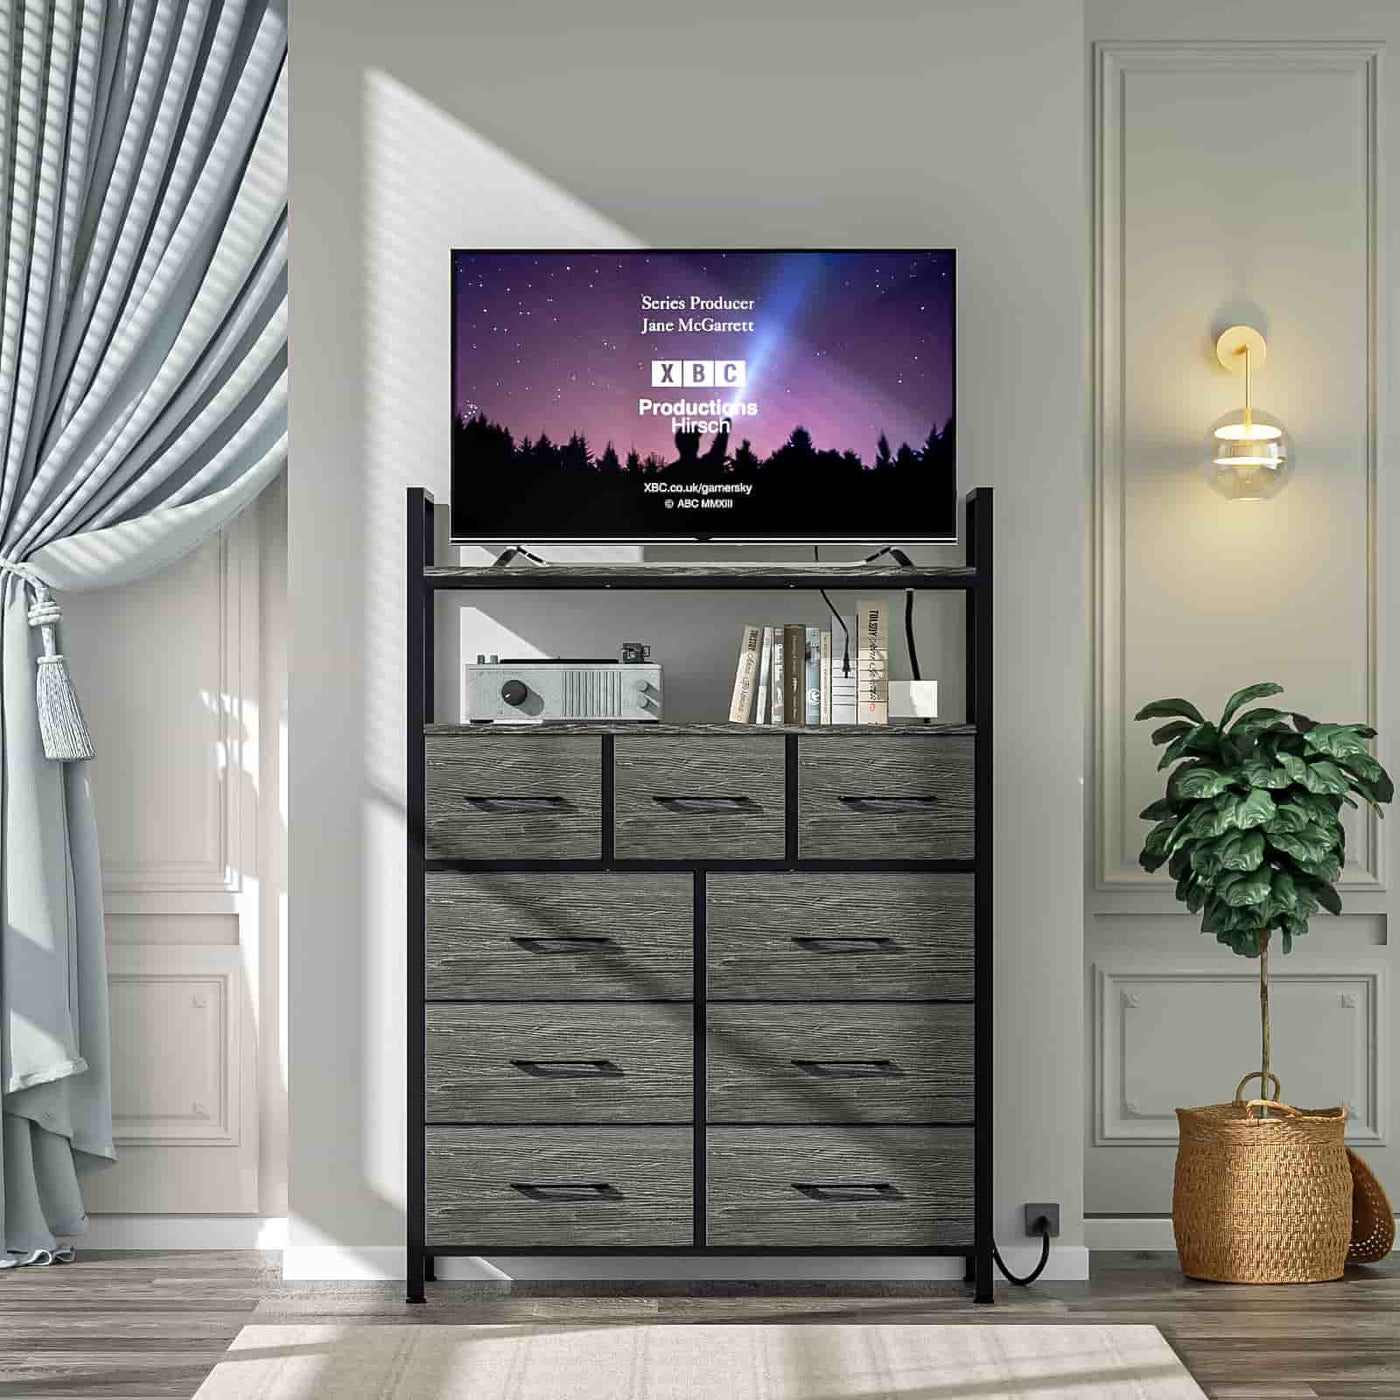 Wasagun Dresser with Fabric Drawers, with 9 Shelves, for Bedroom